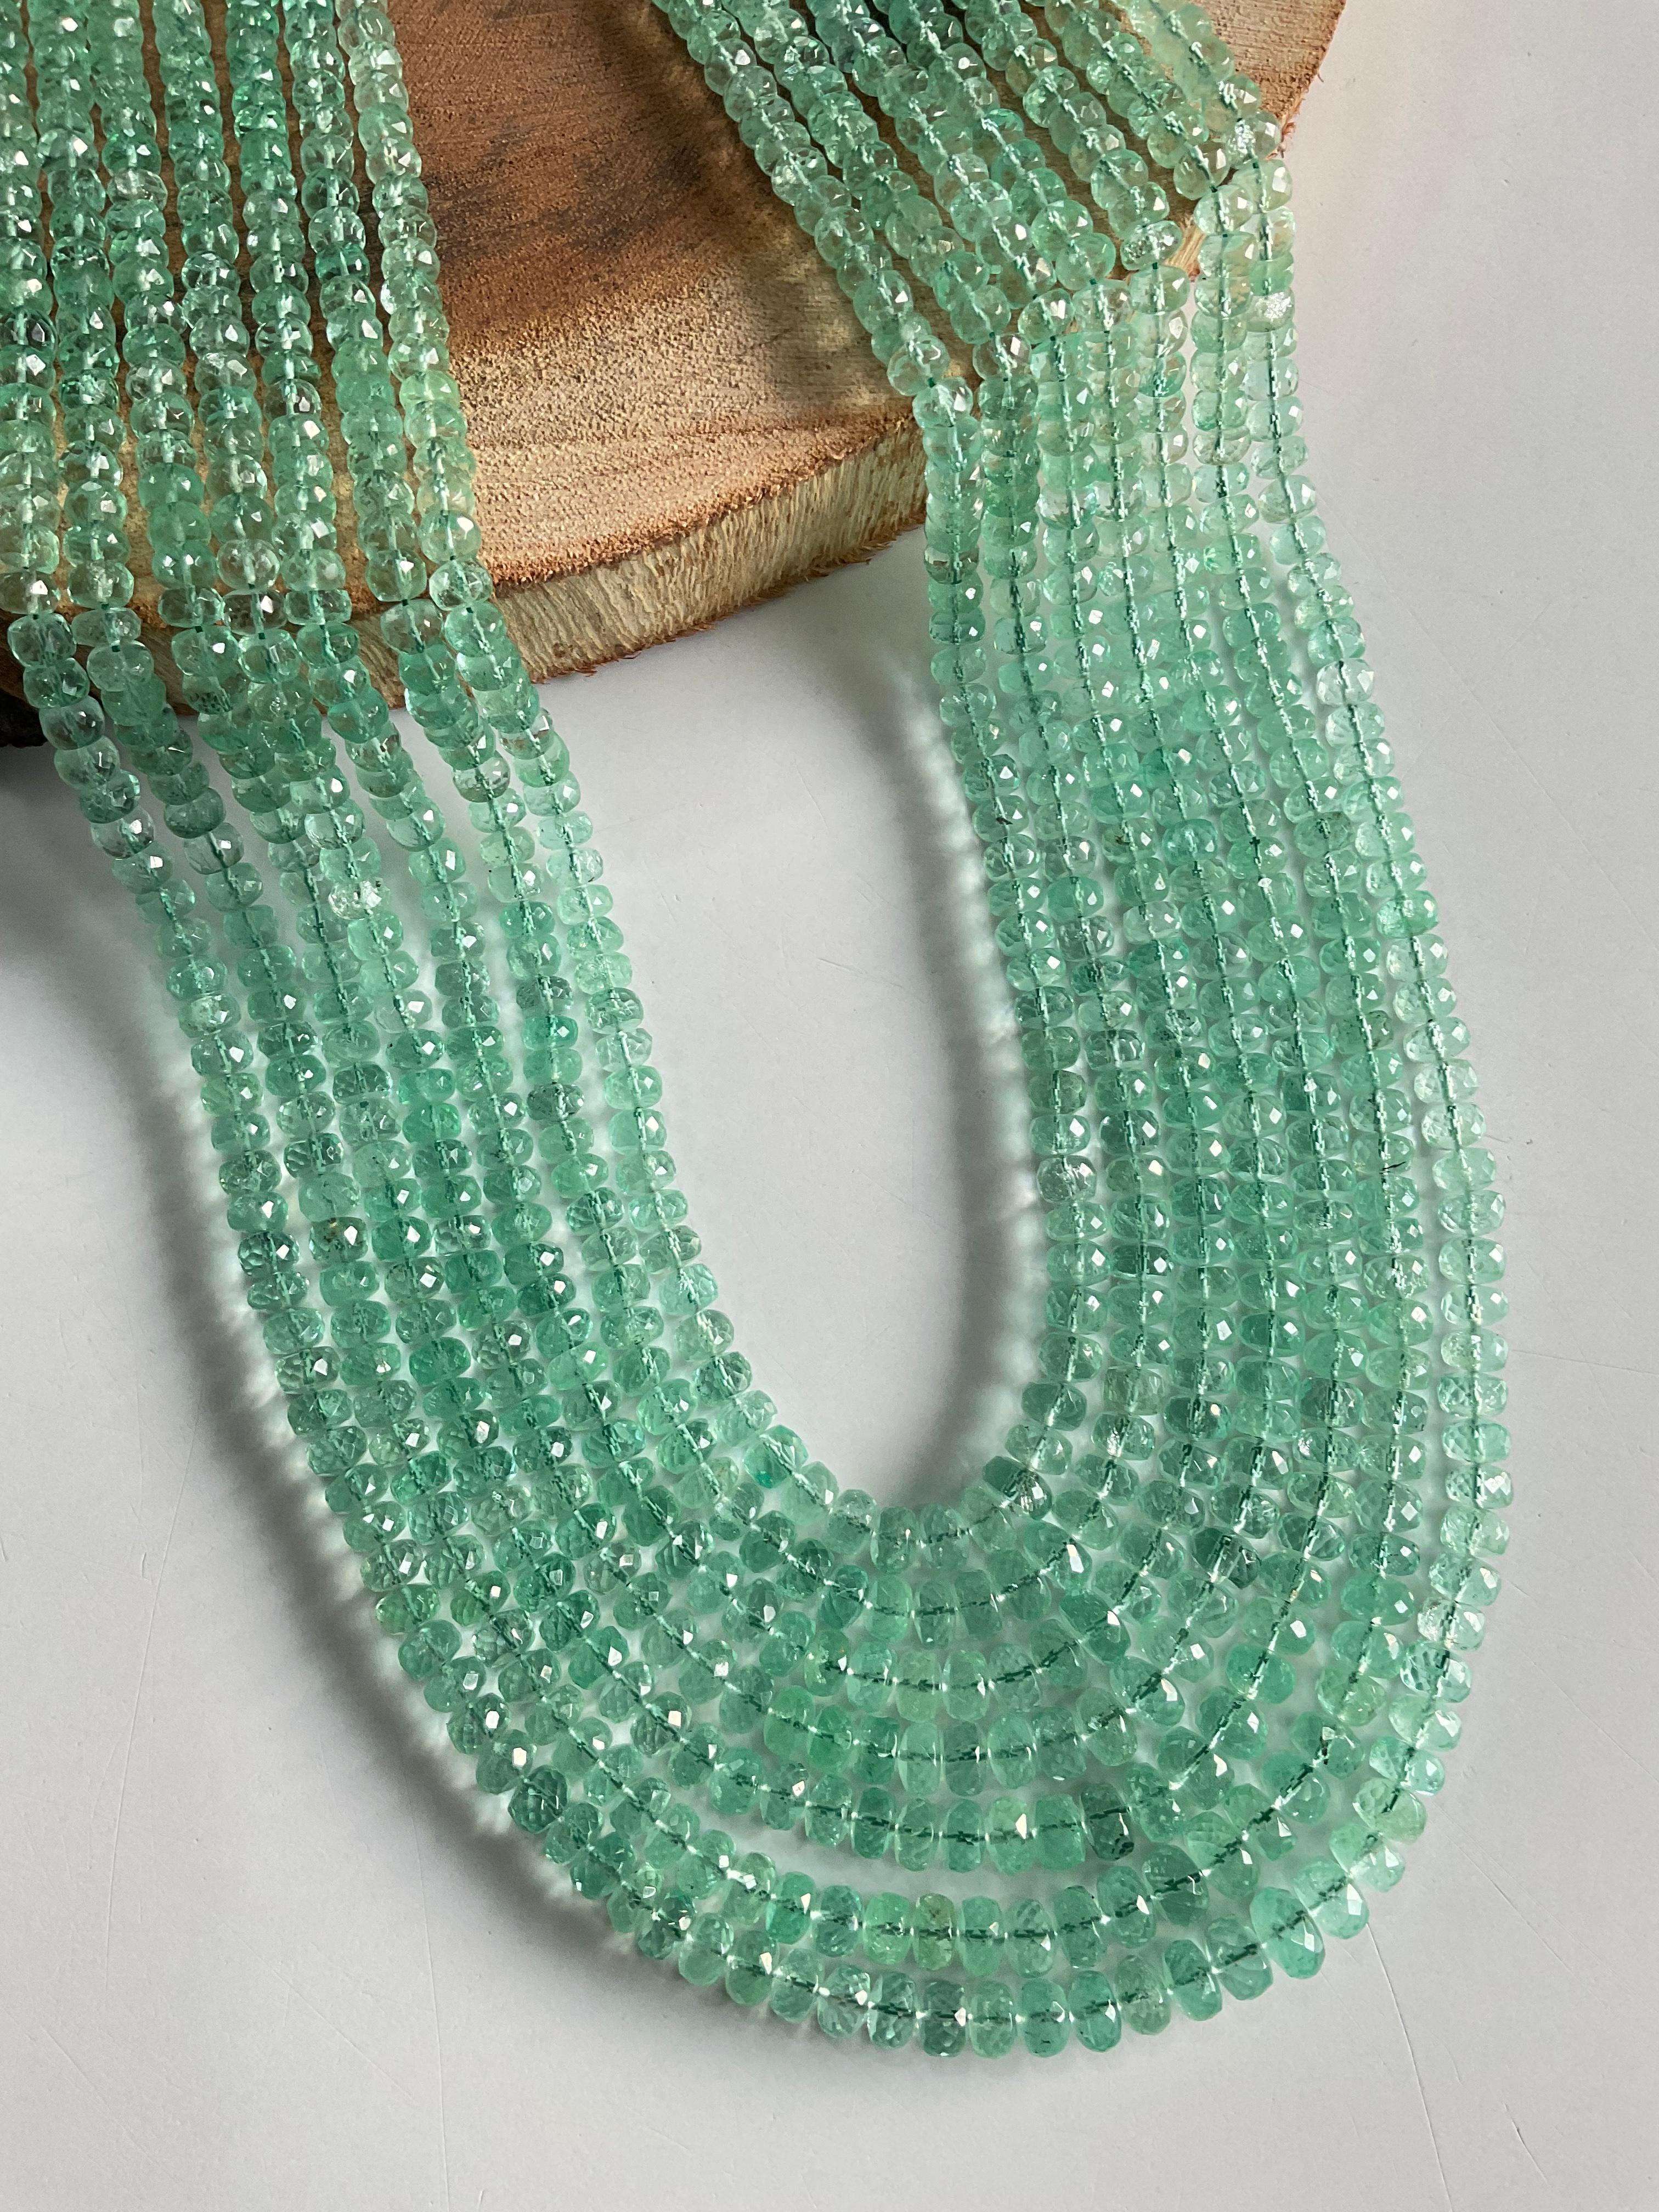 beaded emerald necklace